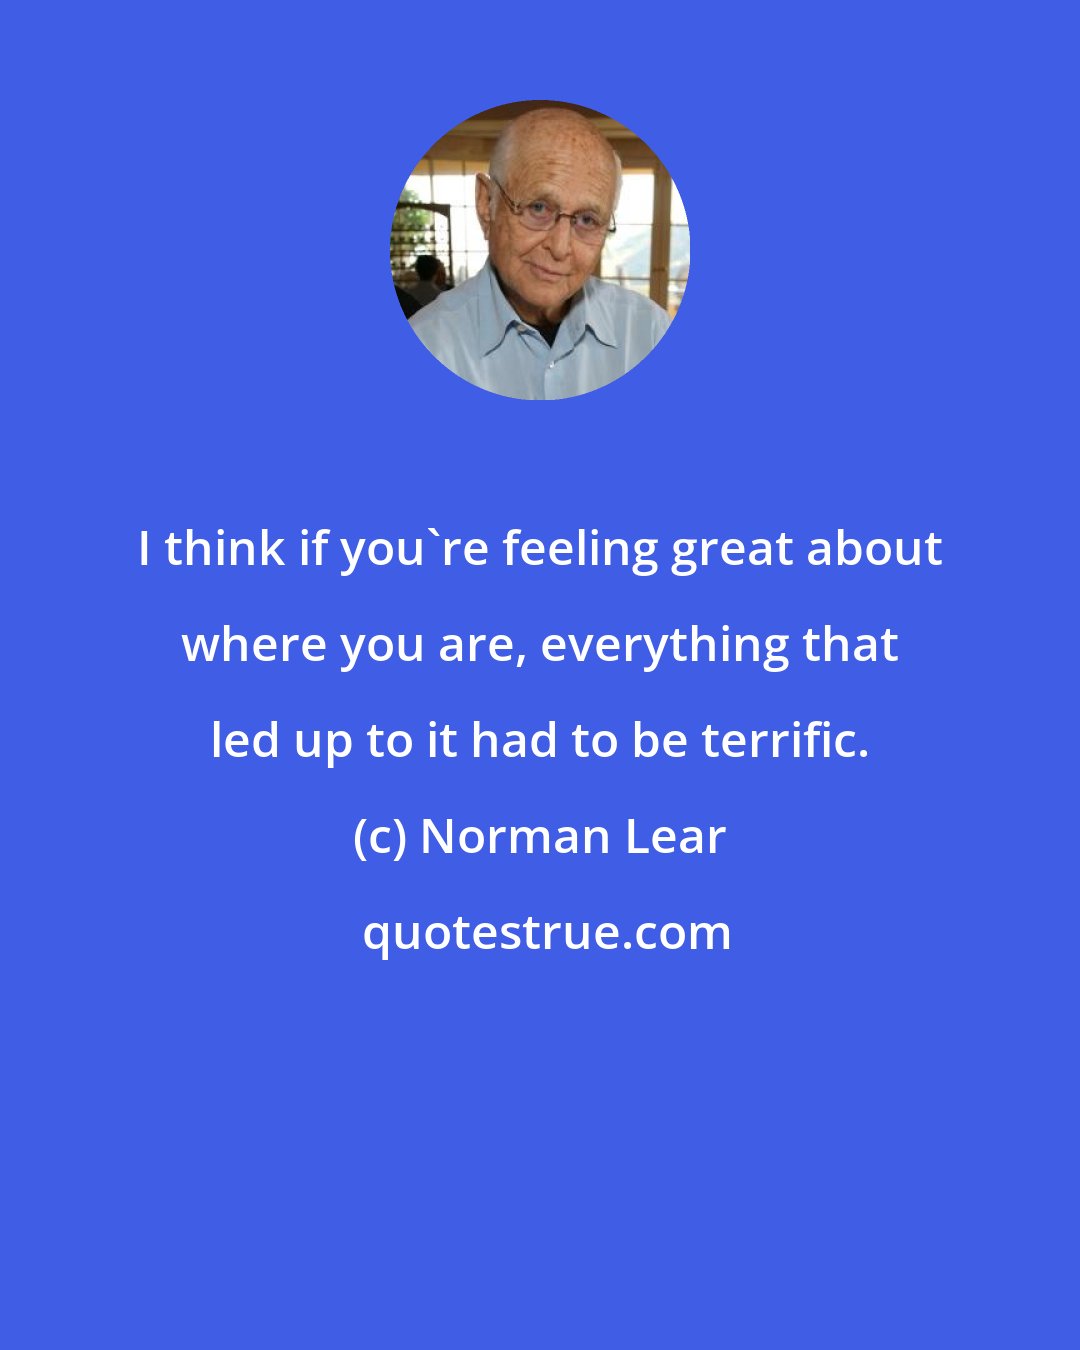 Norman Lear: I think if you're feeling great about where you are, everything that led up to it had to be terrific.